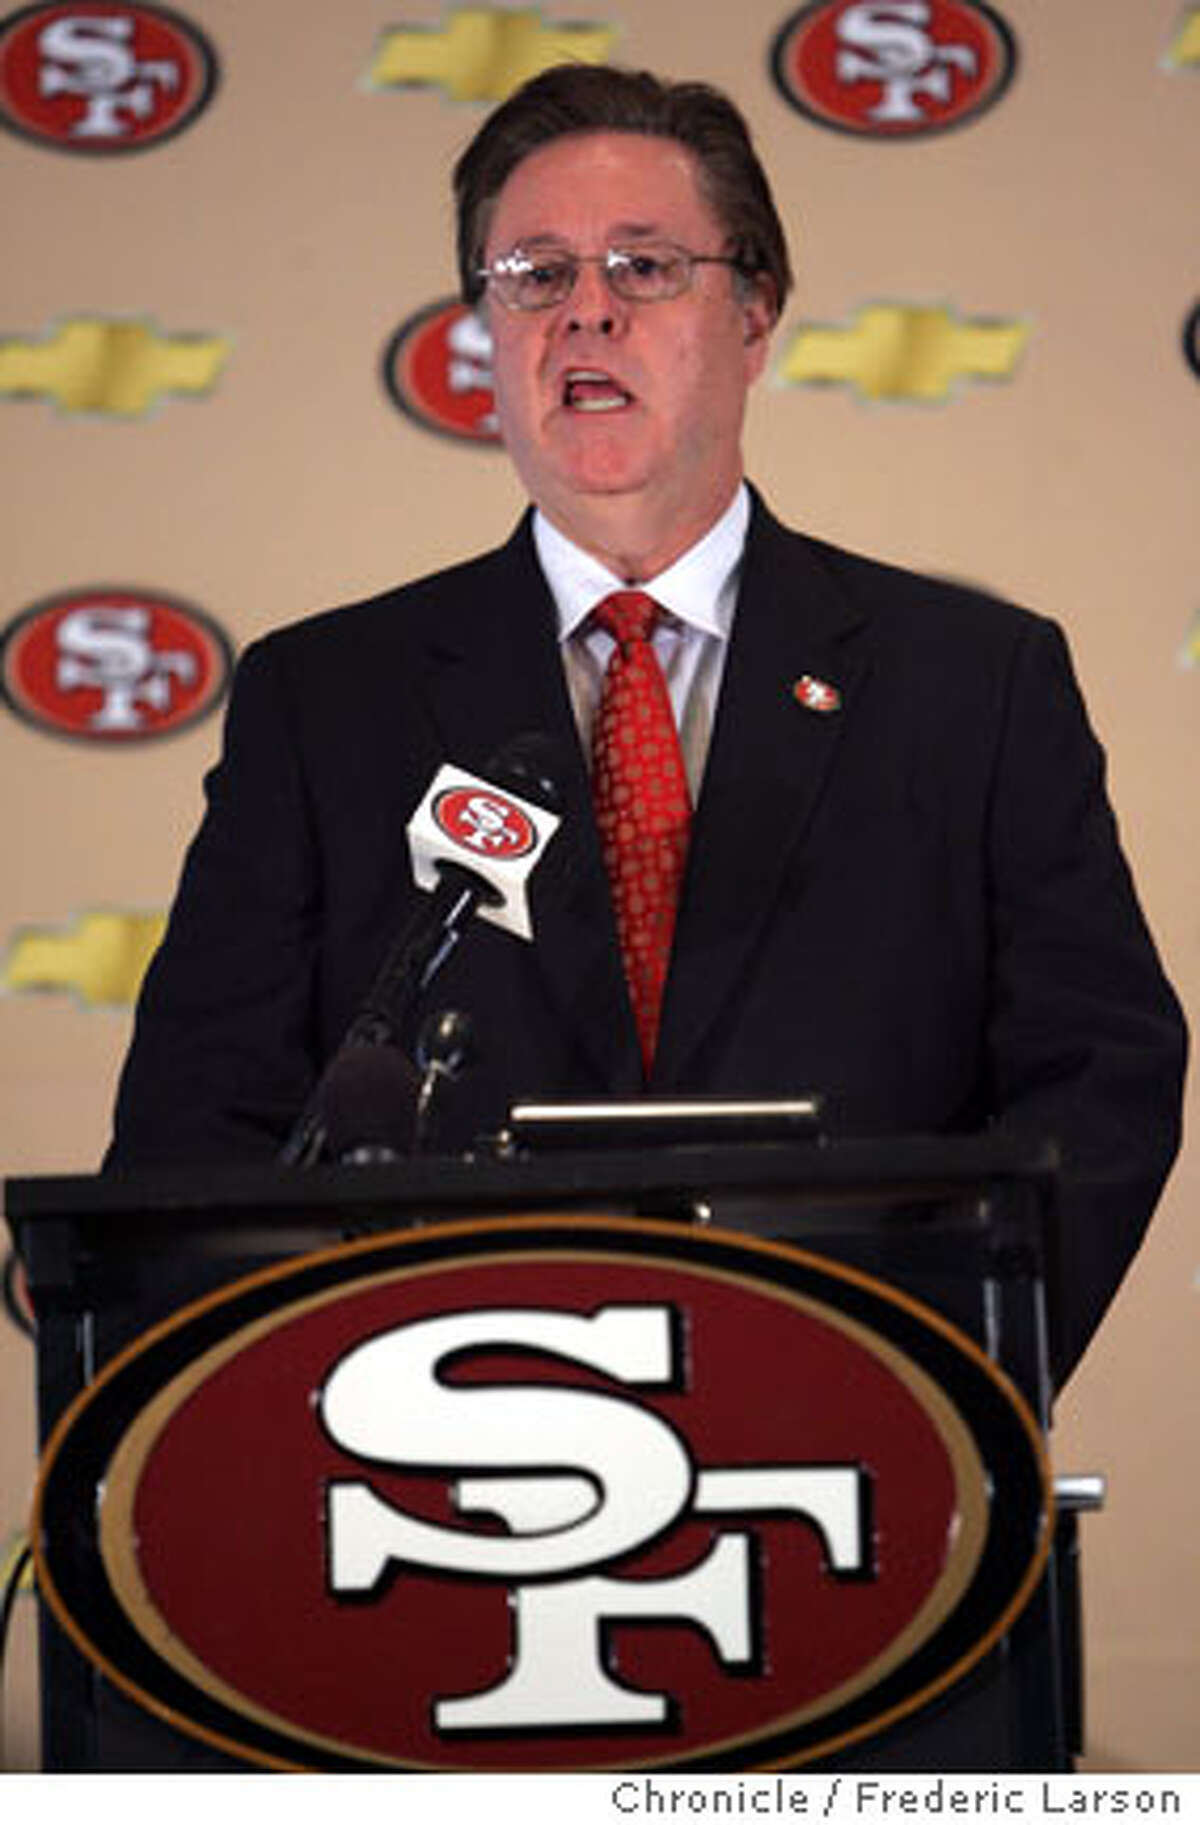 Owner of the 49ers John York stated at a press conference in Santa Clara that The San Francisco 49ers will abandon their namesake city and look to build a stadium in Santa Clara, after concluding that their plan to build a stadium and retail-housing complex at Candlestick Point will not work. The 49ers said Candlestick Point, where the team has played since 1971, cannot support a "new state-of-the-art NFL stadium and adjacent major mixed-use project." The decision to look at Santa Clara -- the team's headquarters and the site of their training facility -- came after "careful deliberation" and a year of study, the team said. "The team came to the conclusion that the (San Francisco) project would not have offered the optimal game day experience it is seeking to create for fans, and has therefore decided not to move forward with the public approval process at Candlestick Point," the 49ers said in a statement. 11/9/06 {Photographed by }